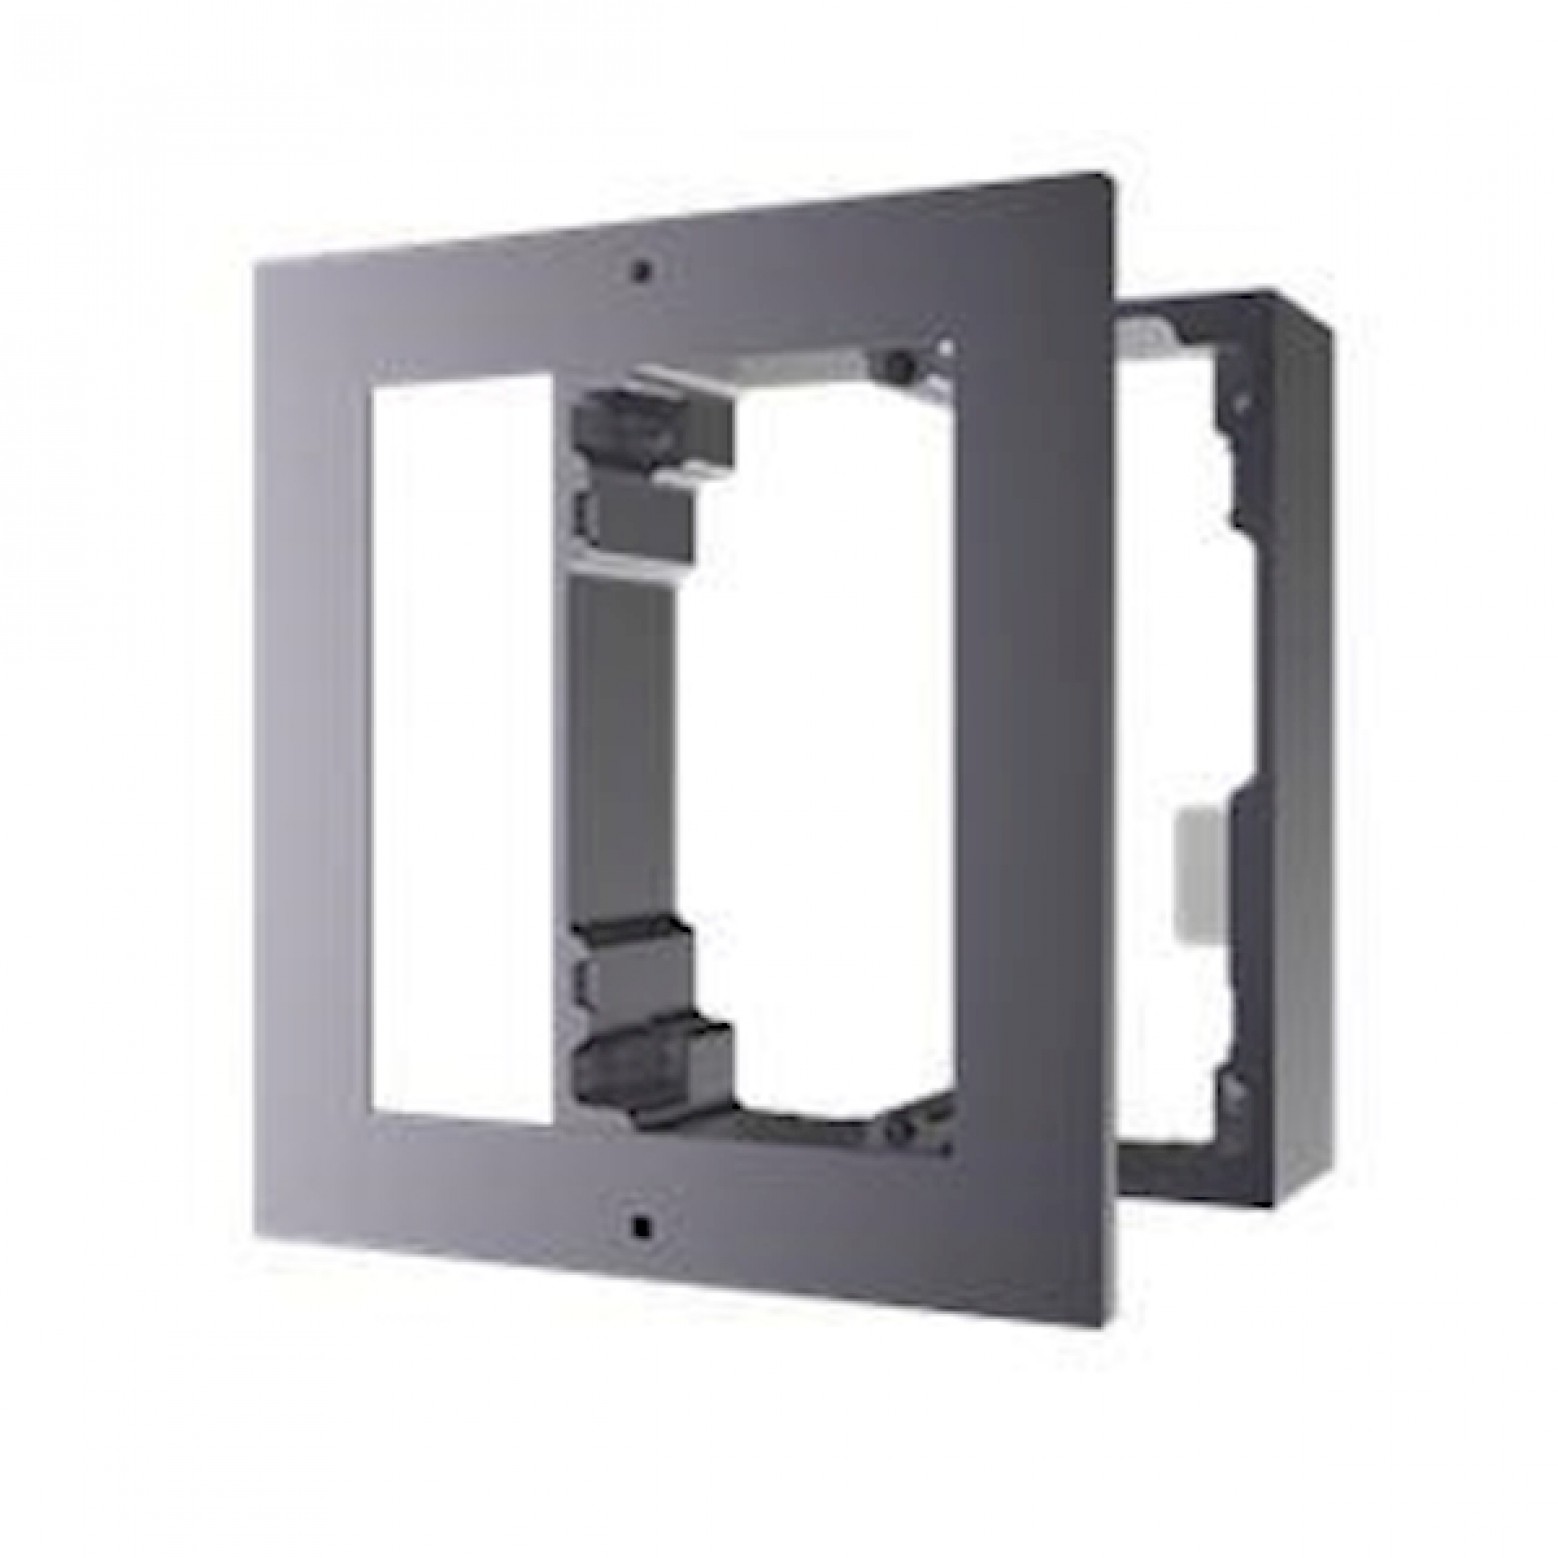 Hikvision DS-KD-ACW1 opbouwframe, 1 module